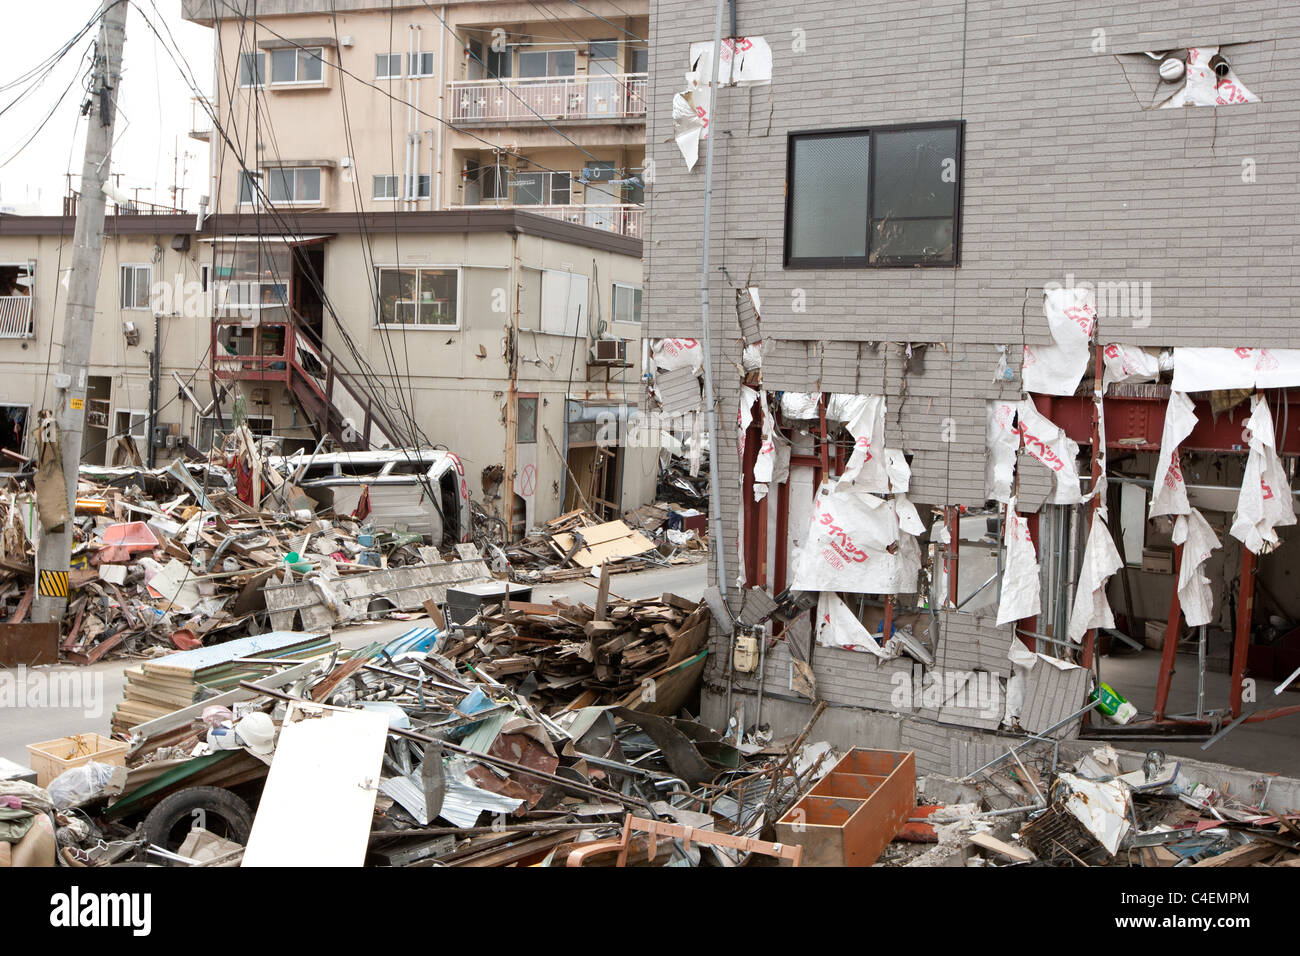 Damage and debris caused by the March 11th earthquake and tsunami, in Kamaishi city, Tohoku region, Japan, on 12th April 2011. Stock Photo